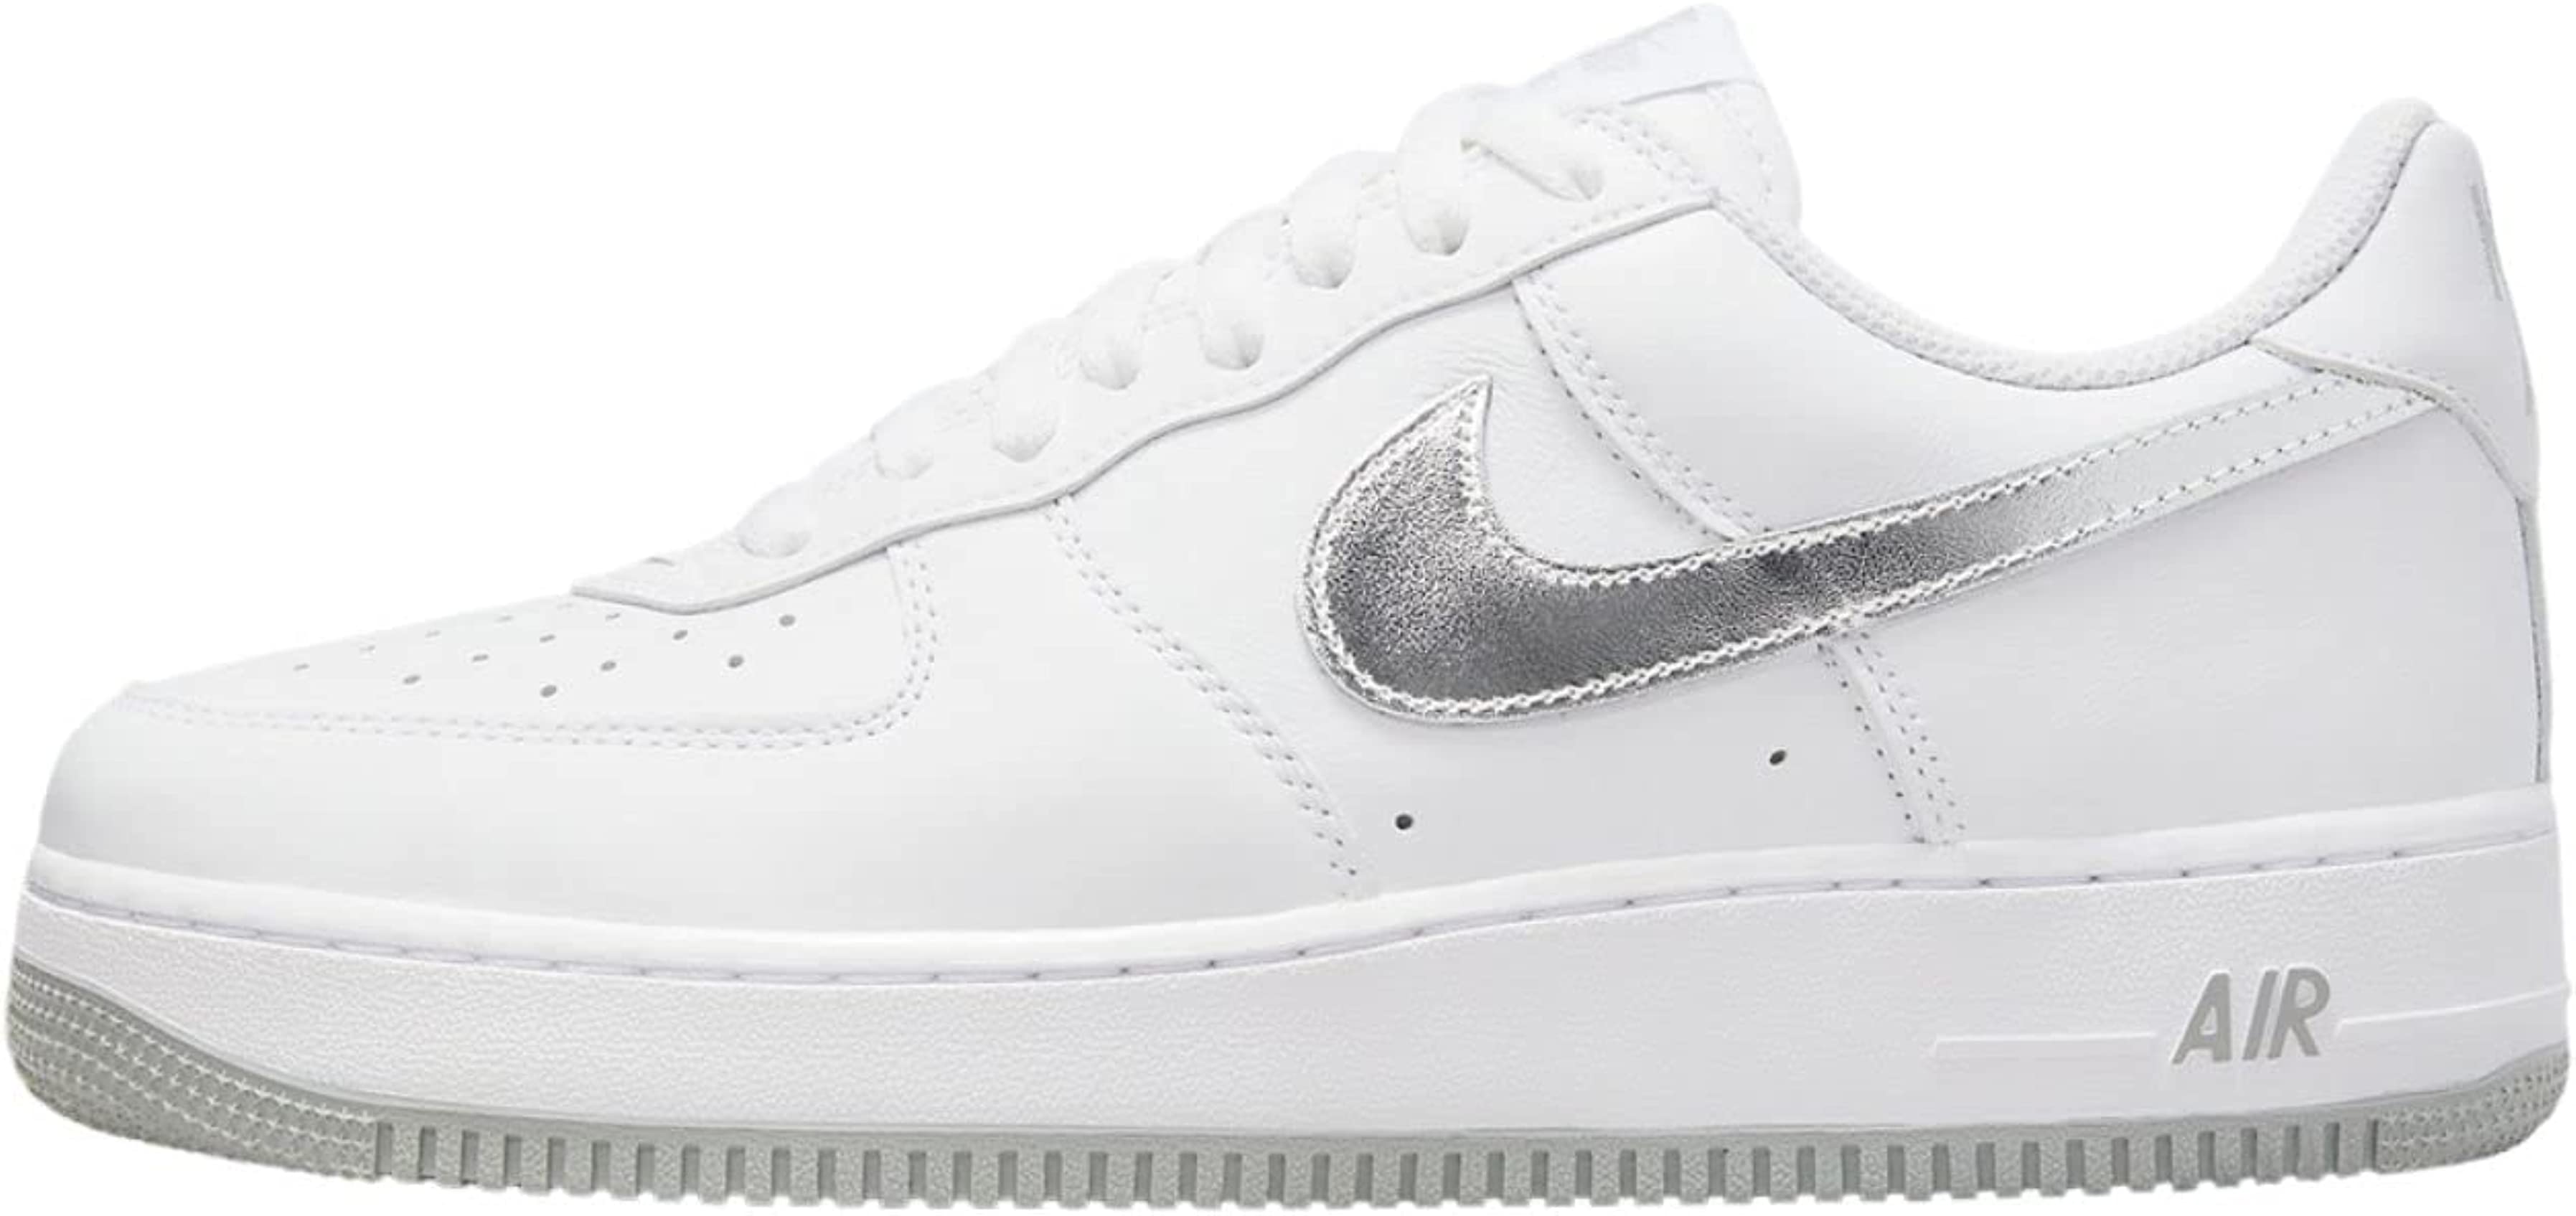 Nike Mens Air Force 1 Low Retro Sneakers,White/Sail/Team Red